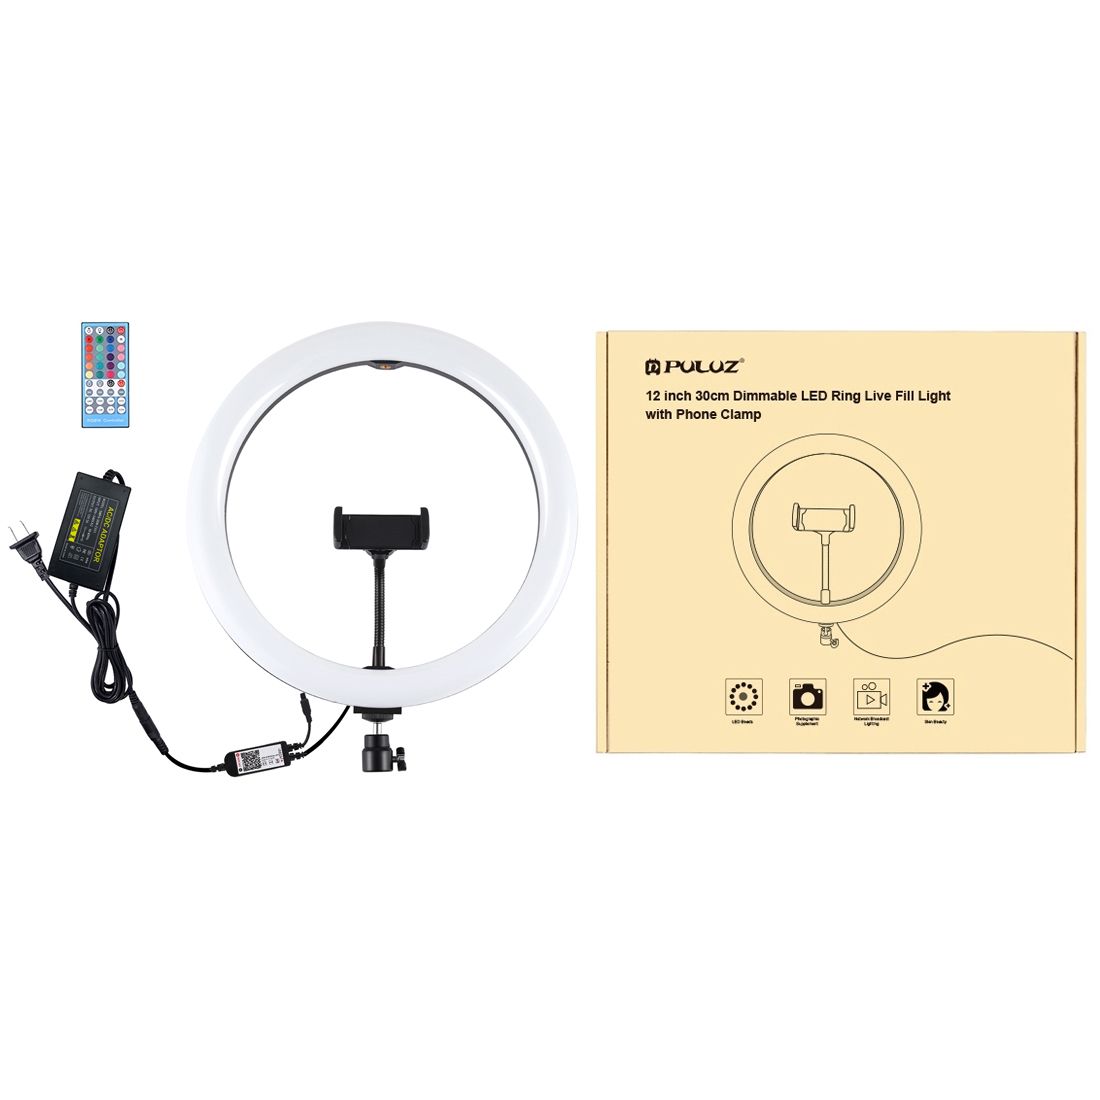 PULUZ-PU411-12-Inch-6000-6500k-Dimmable-LED-RGB-Video-Ring-Light-with-Remote-Control-for-Selfie-Vlog-1561623